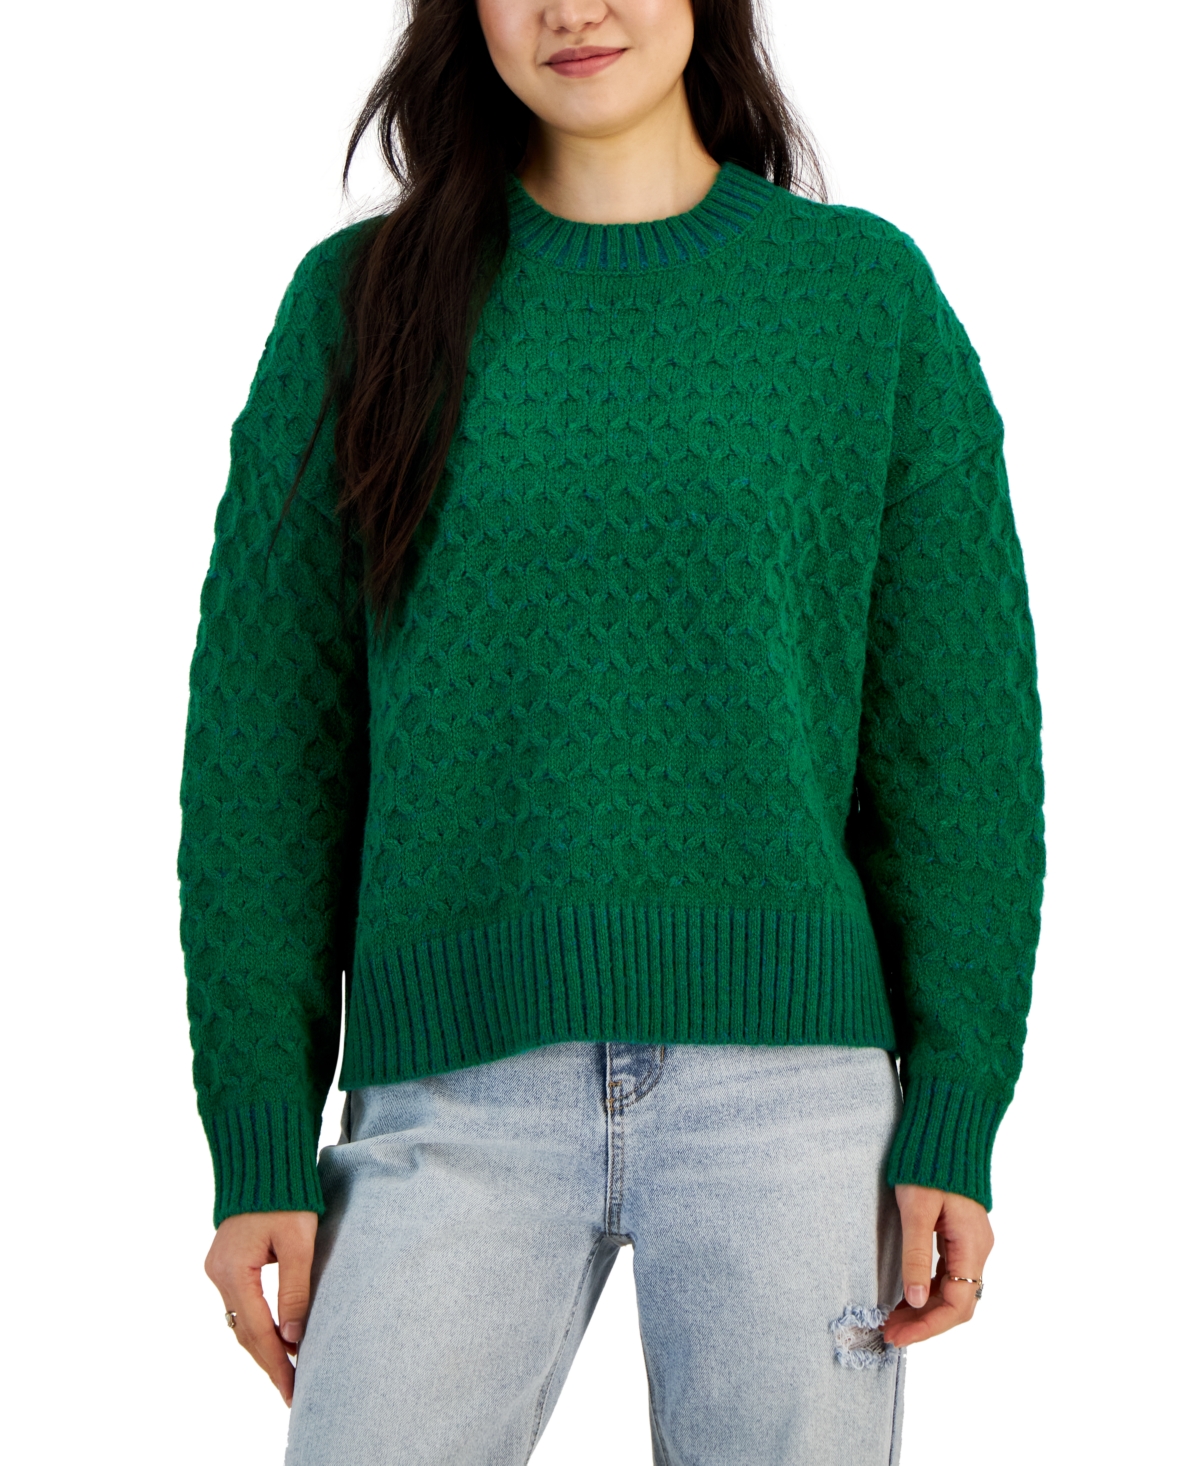 Hooked Up By Iot Juniors' Honeycomb-knit Crewneck Sweater In Emerald Green